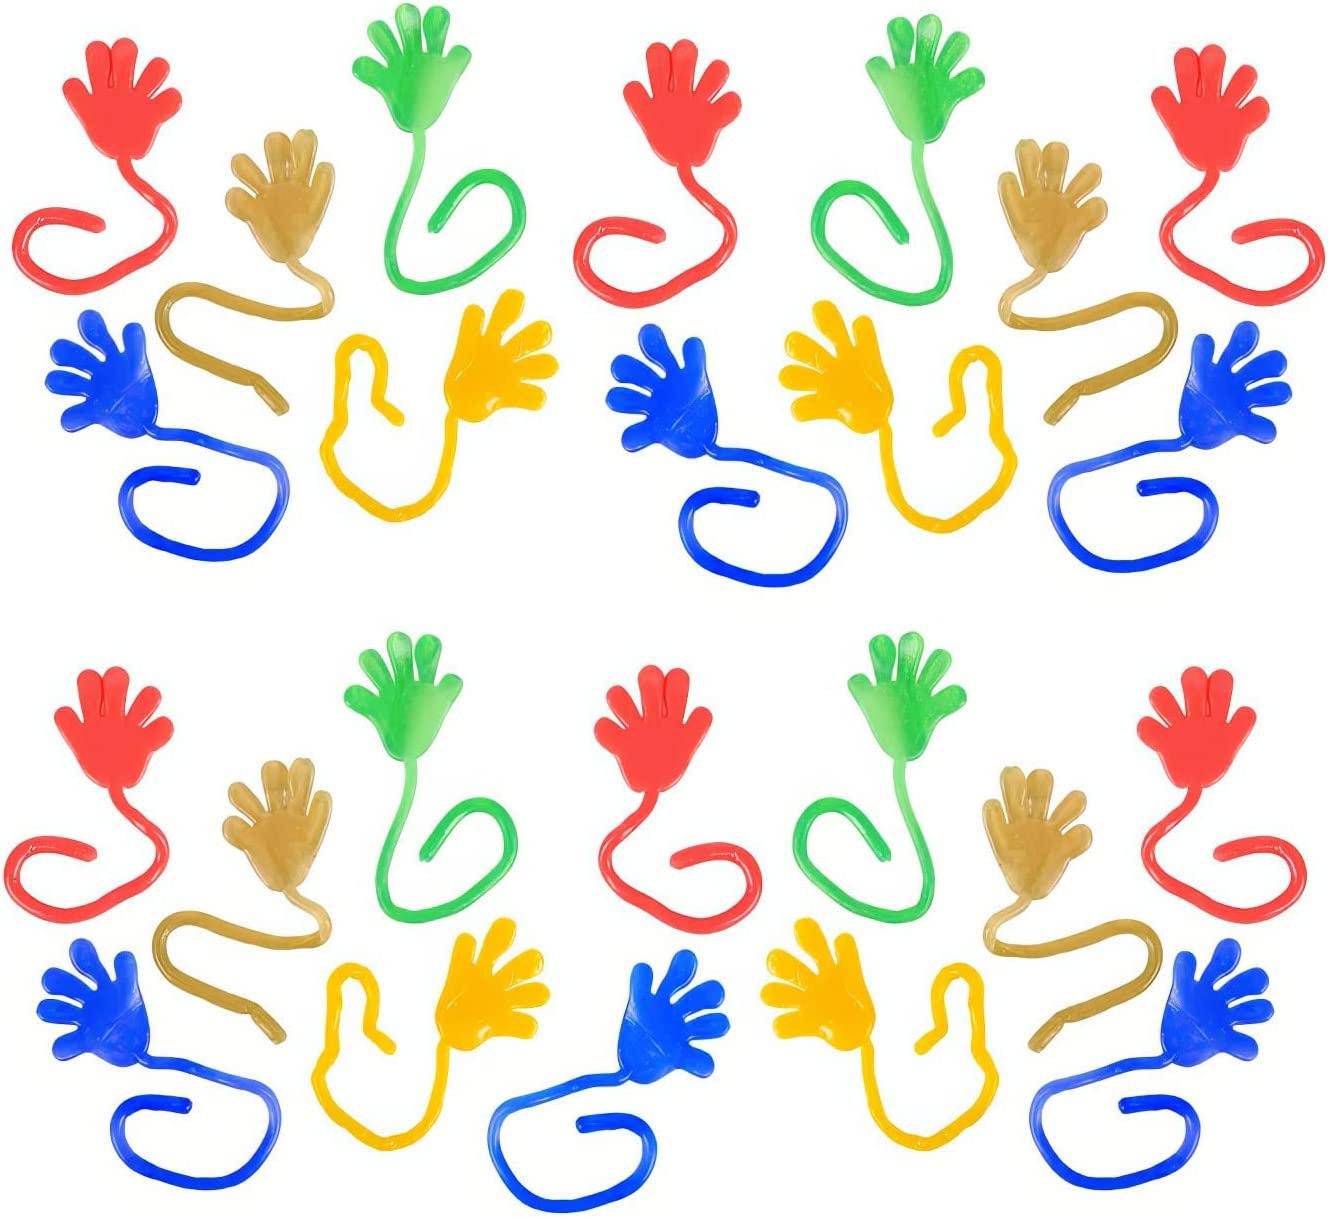 ArtCreativity Sticky Glitter Hands - Pack of 24 - Stretchy Wacky Fingers - Fun Colorful Toys for Kids - Birthday Party Favors for Girls and Boys, Great Carnival Prize, Novelty Gift